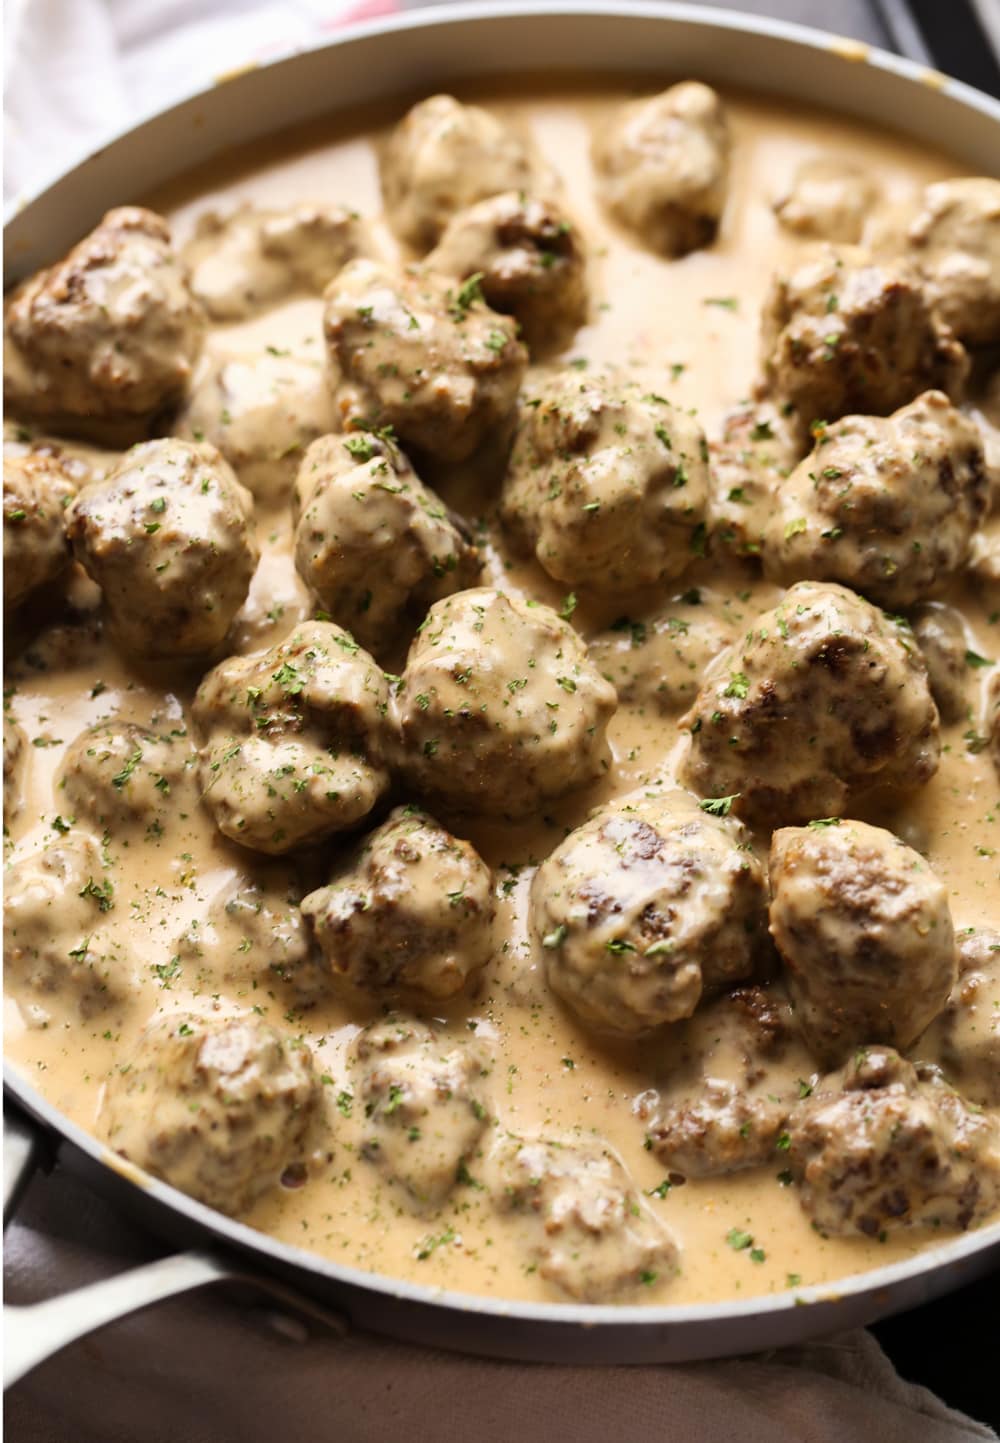 Swedish meatballs with gravy in a pan.